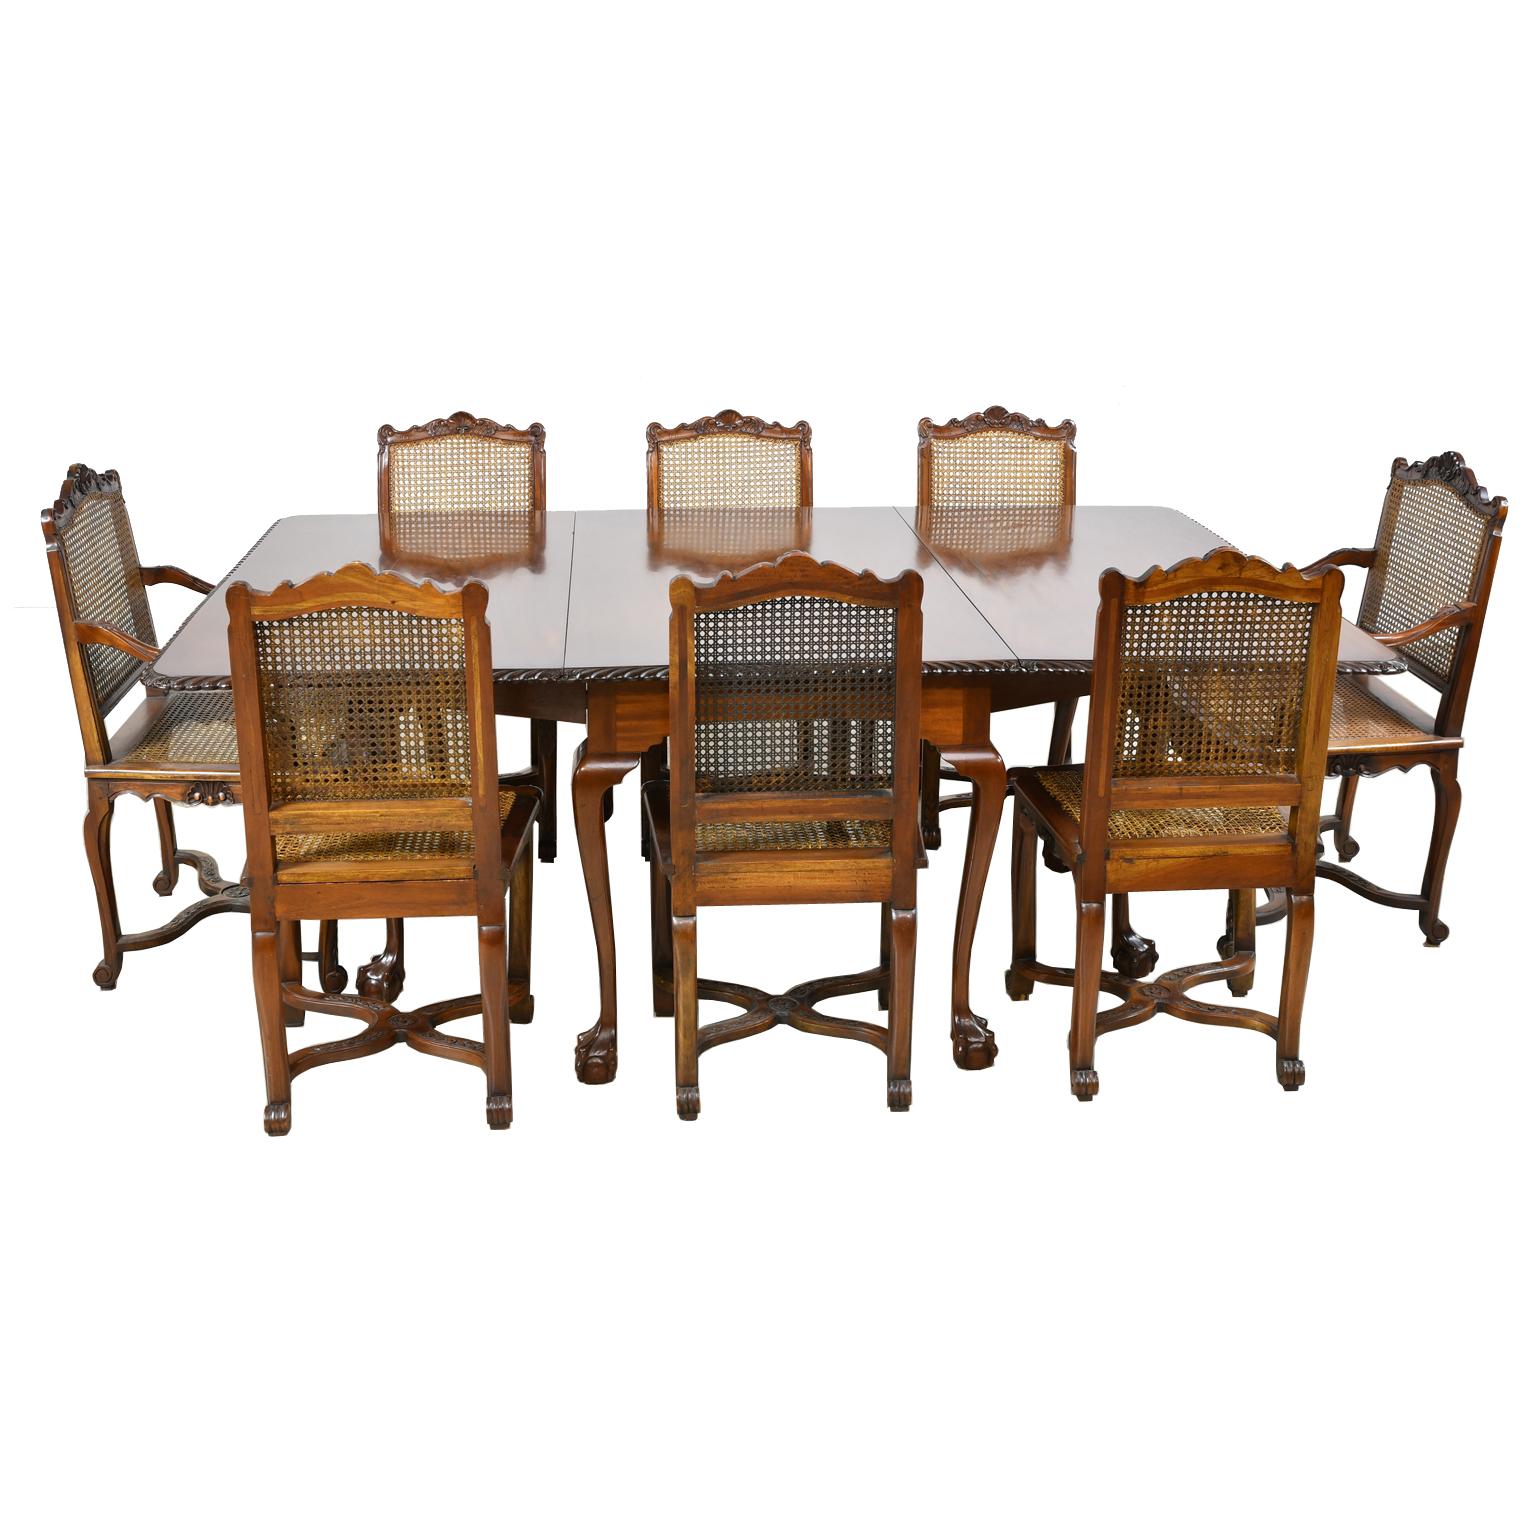 A lovely and well-crafted American-Centennial dining table in mahogany in the Queen Anne style with drop-leaves, carved gadrooning along the edges of top, with cabriole legs on ball-and-claw feet. Table seats 8 when leaves are up and fully extended,